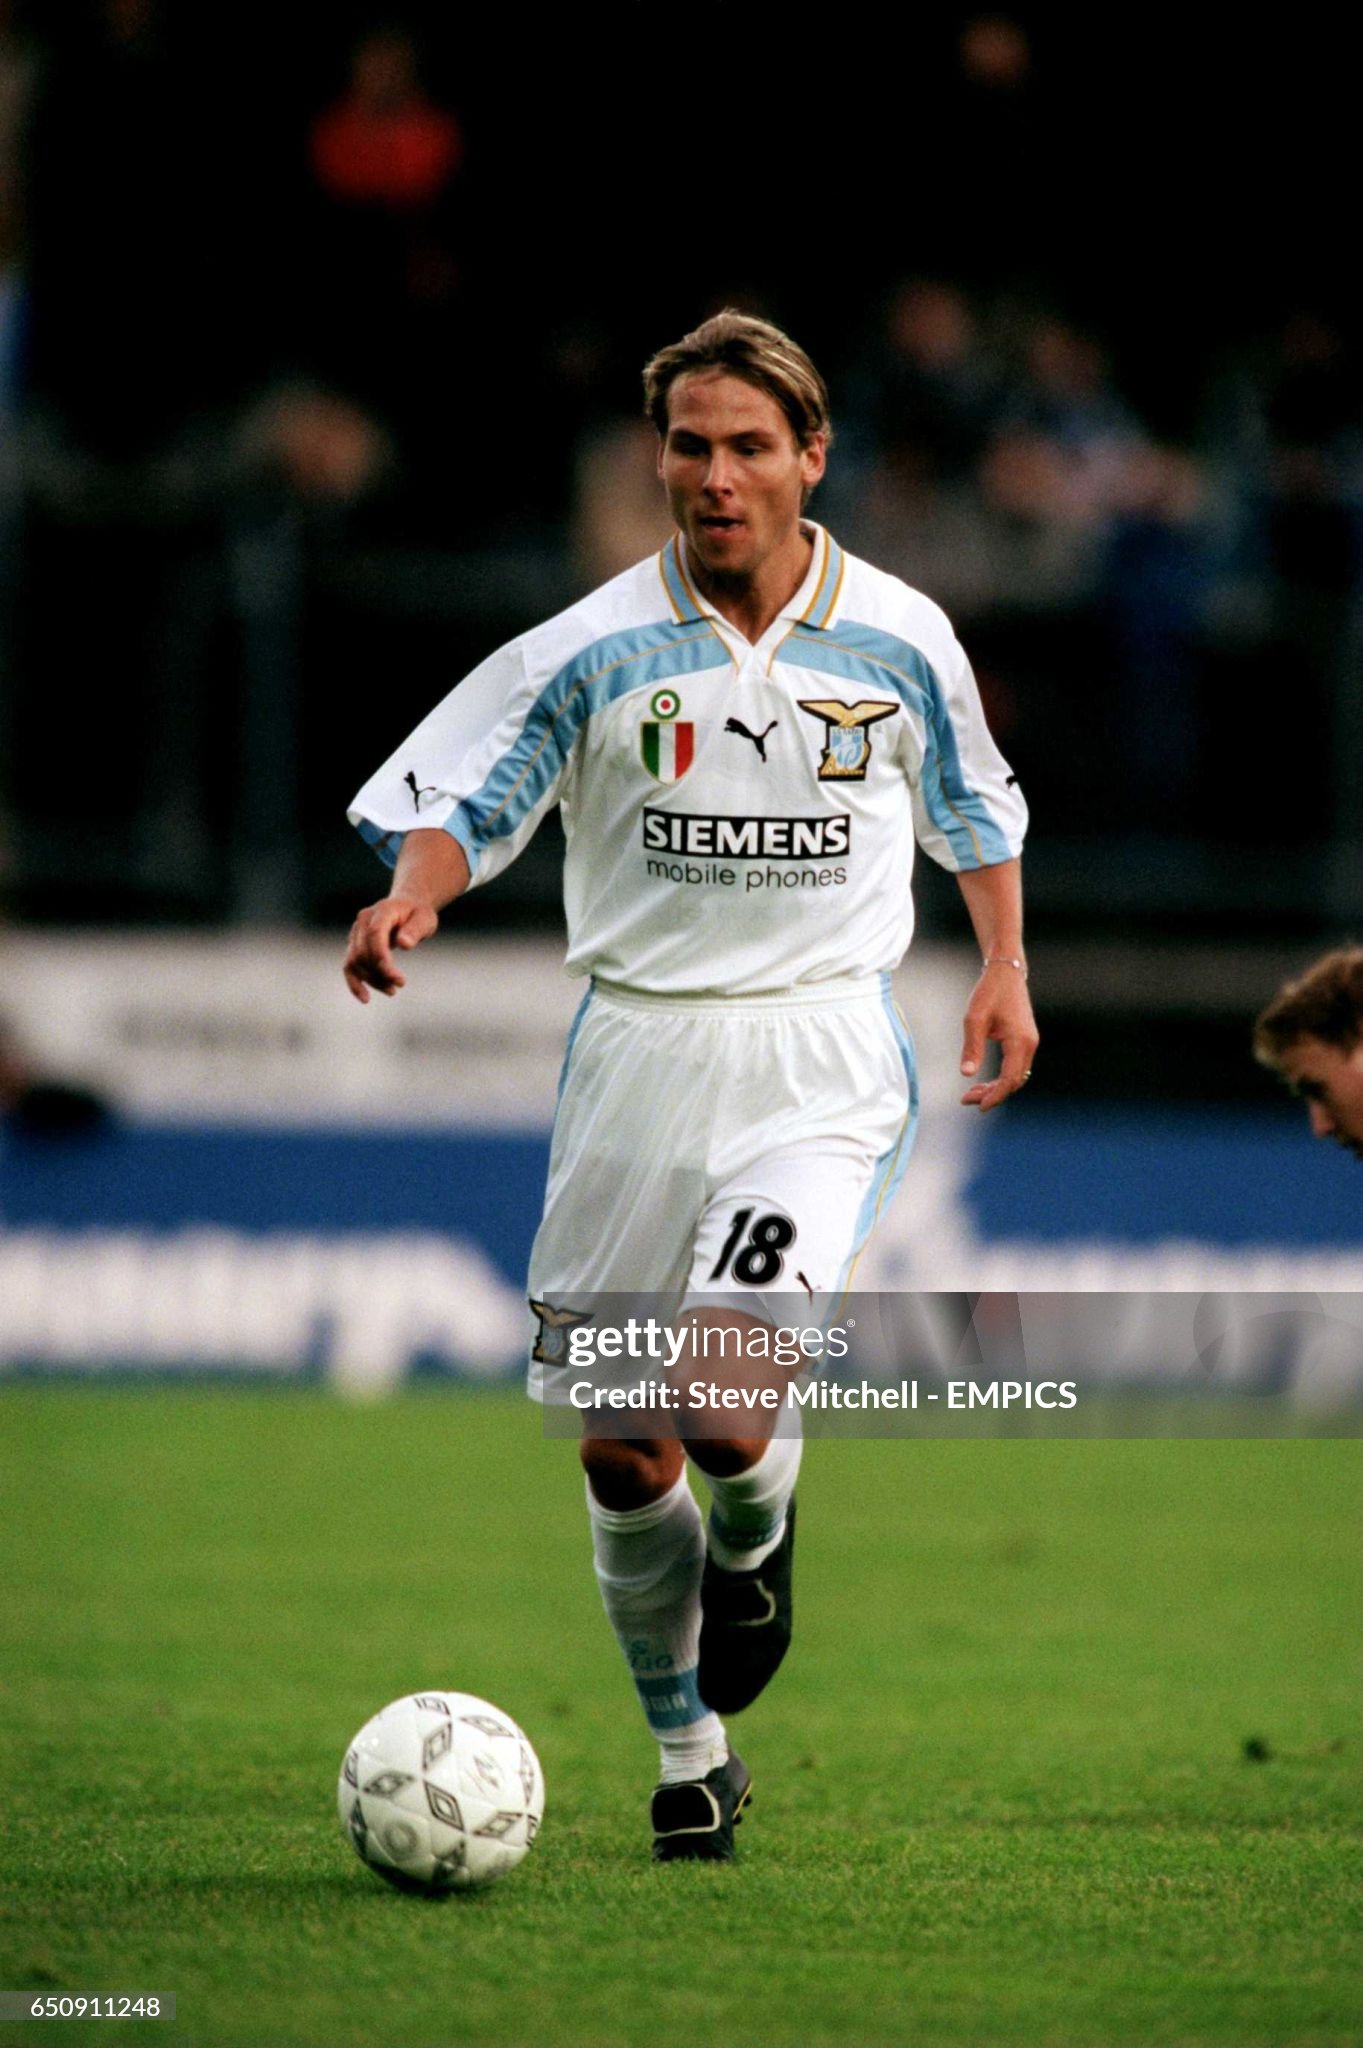 gettyimages-650911248-2048x2048.jpg : SS Lazio 1999-00 Away No.18 Nedved